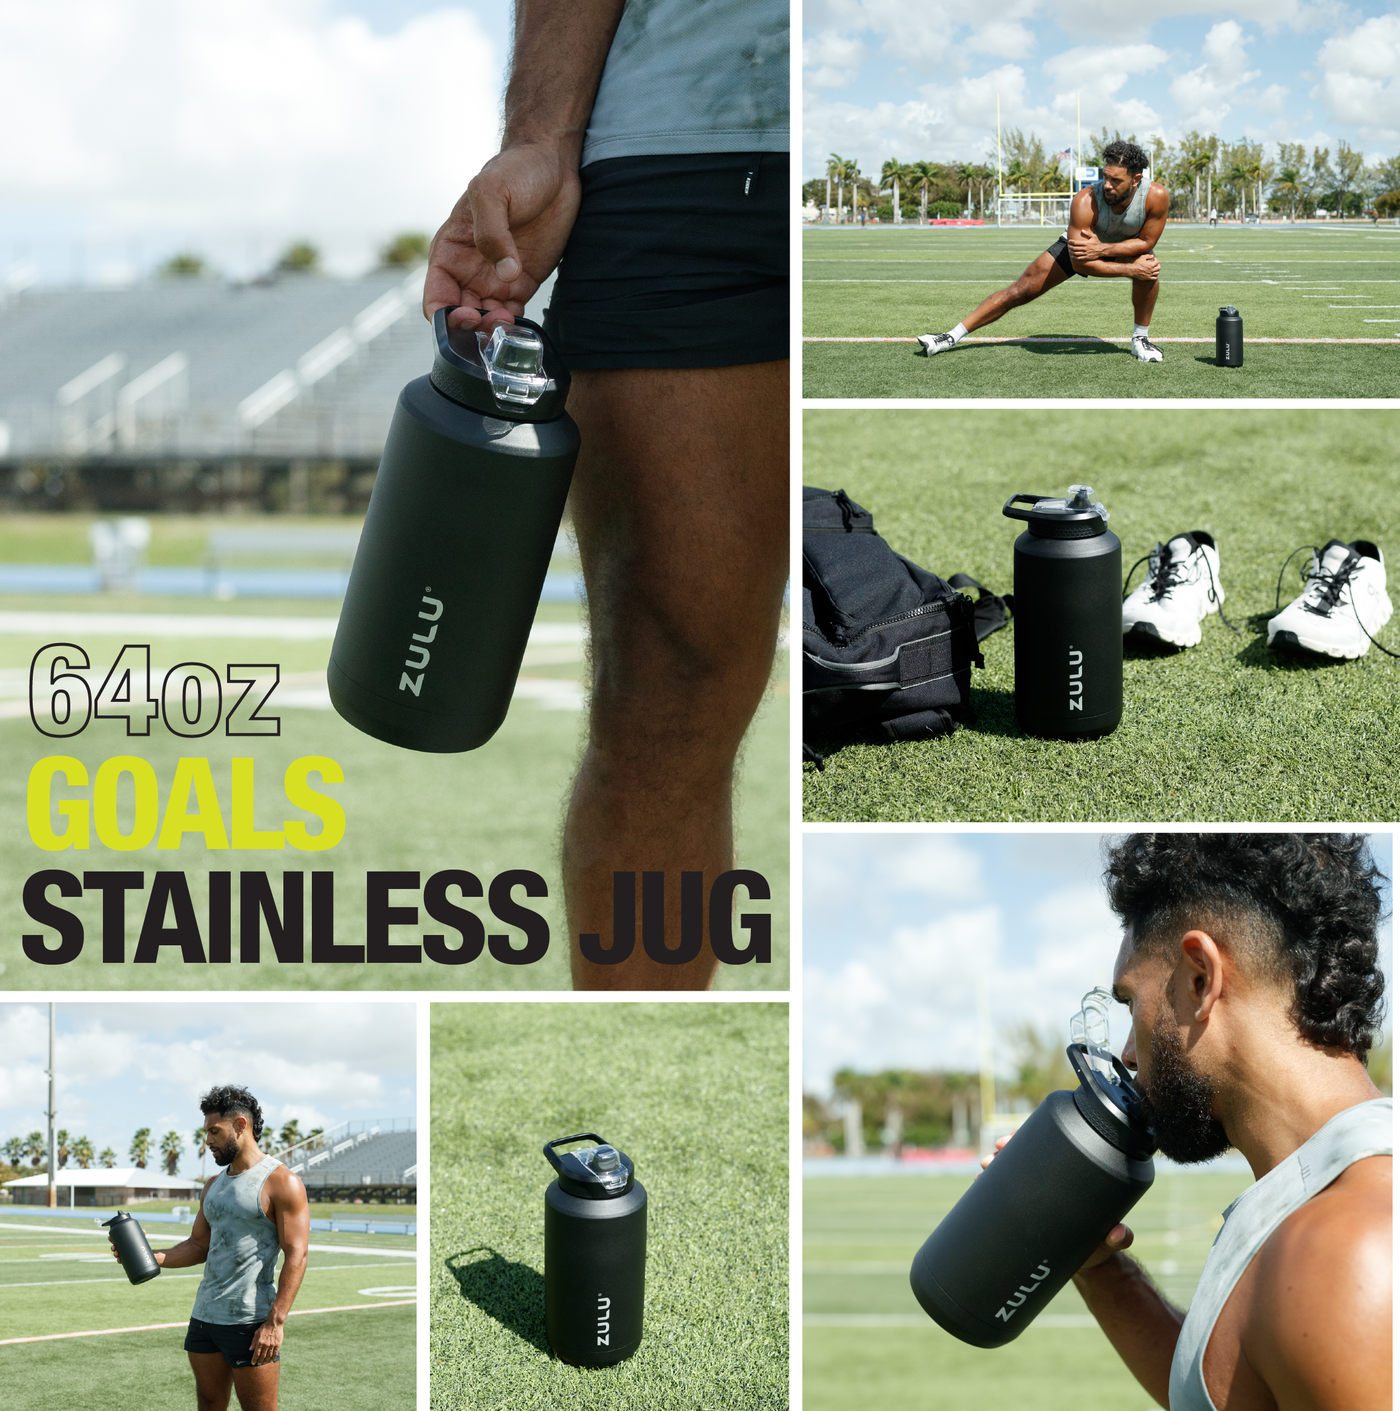 Goals Stainless Steel Half Gallon Water Bottle with Straw – Zulu Athletic